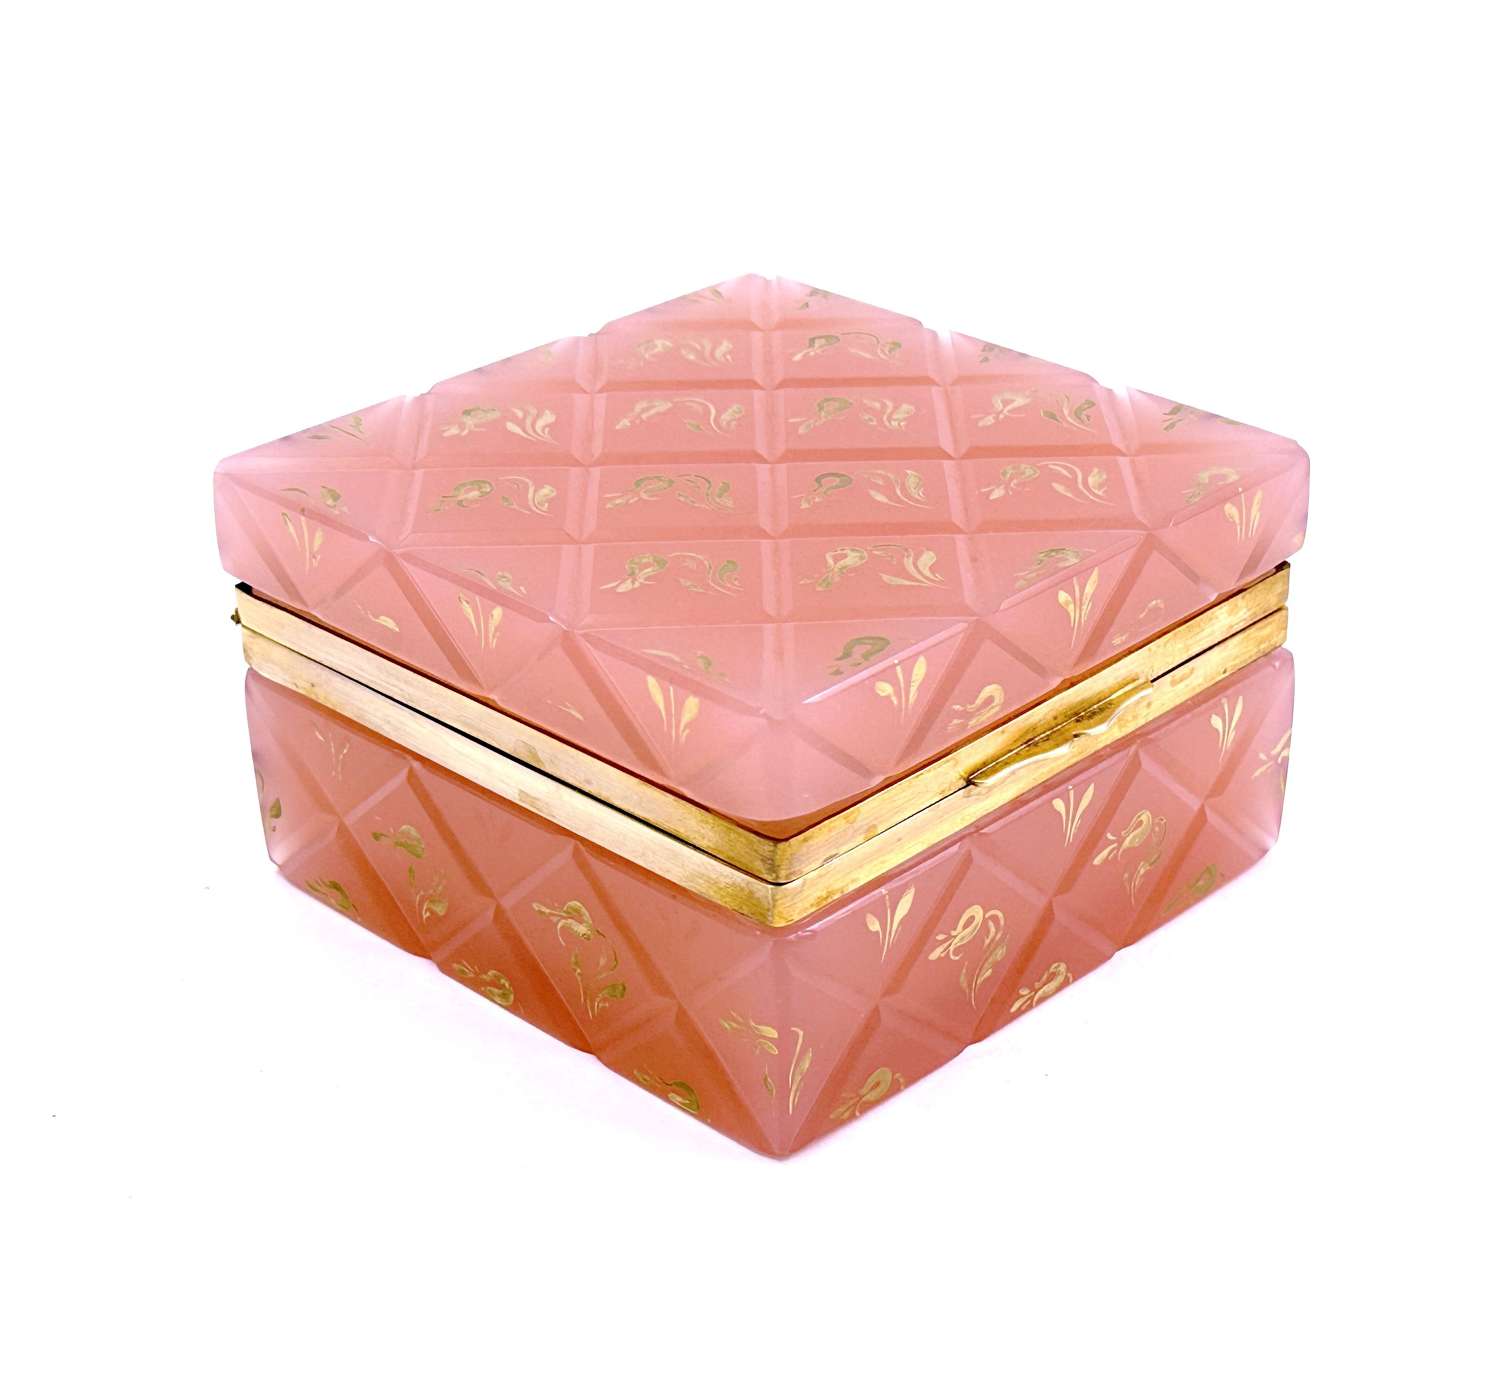 Antique Murano Pink Opaline Cut Glass Square Box with Gold Flowers